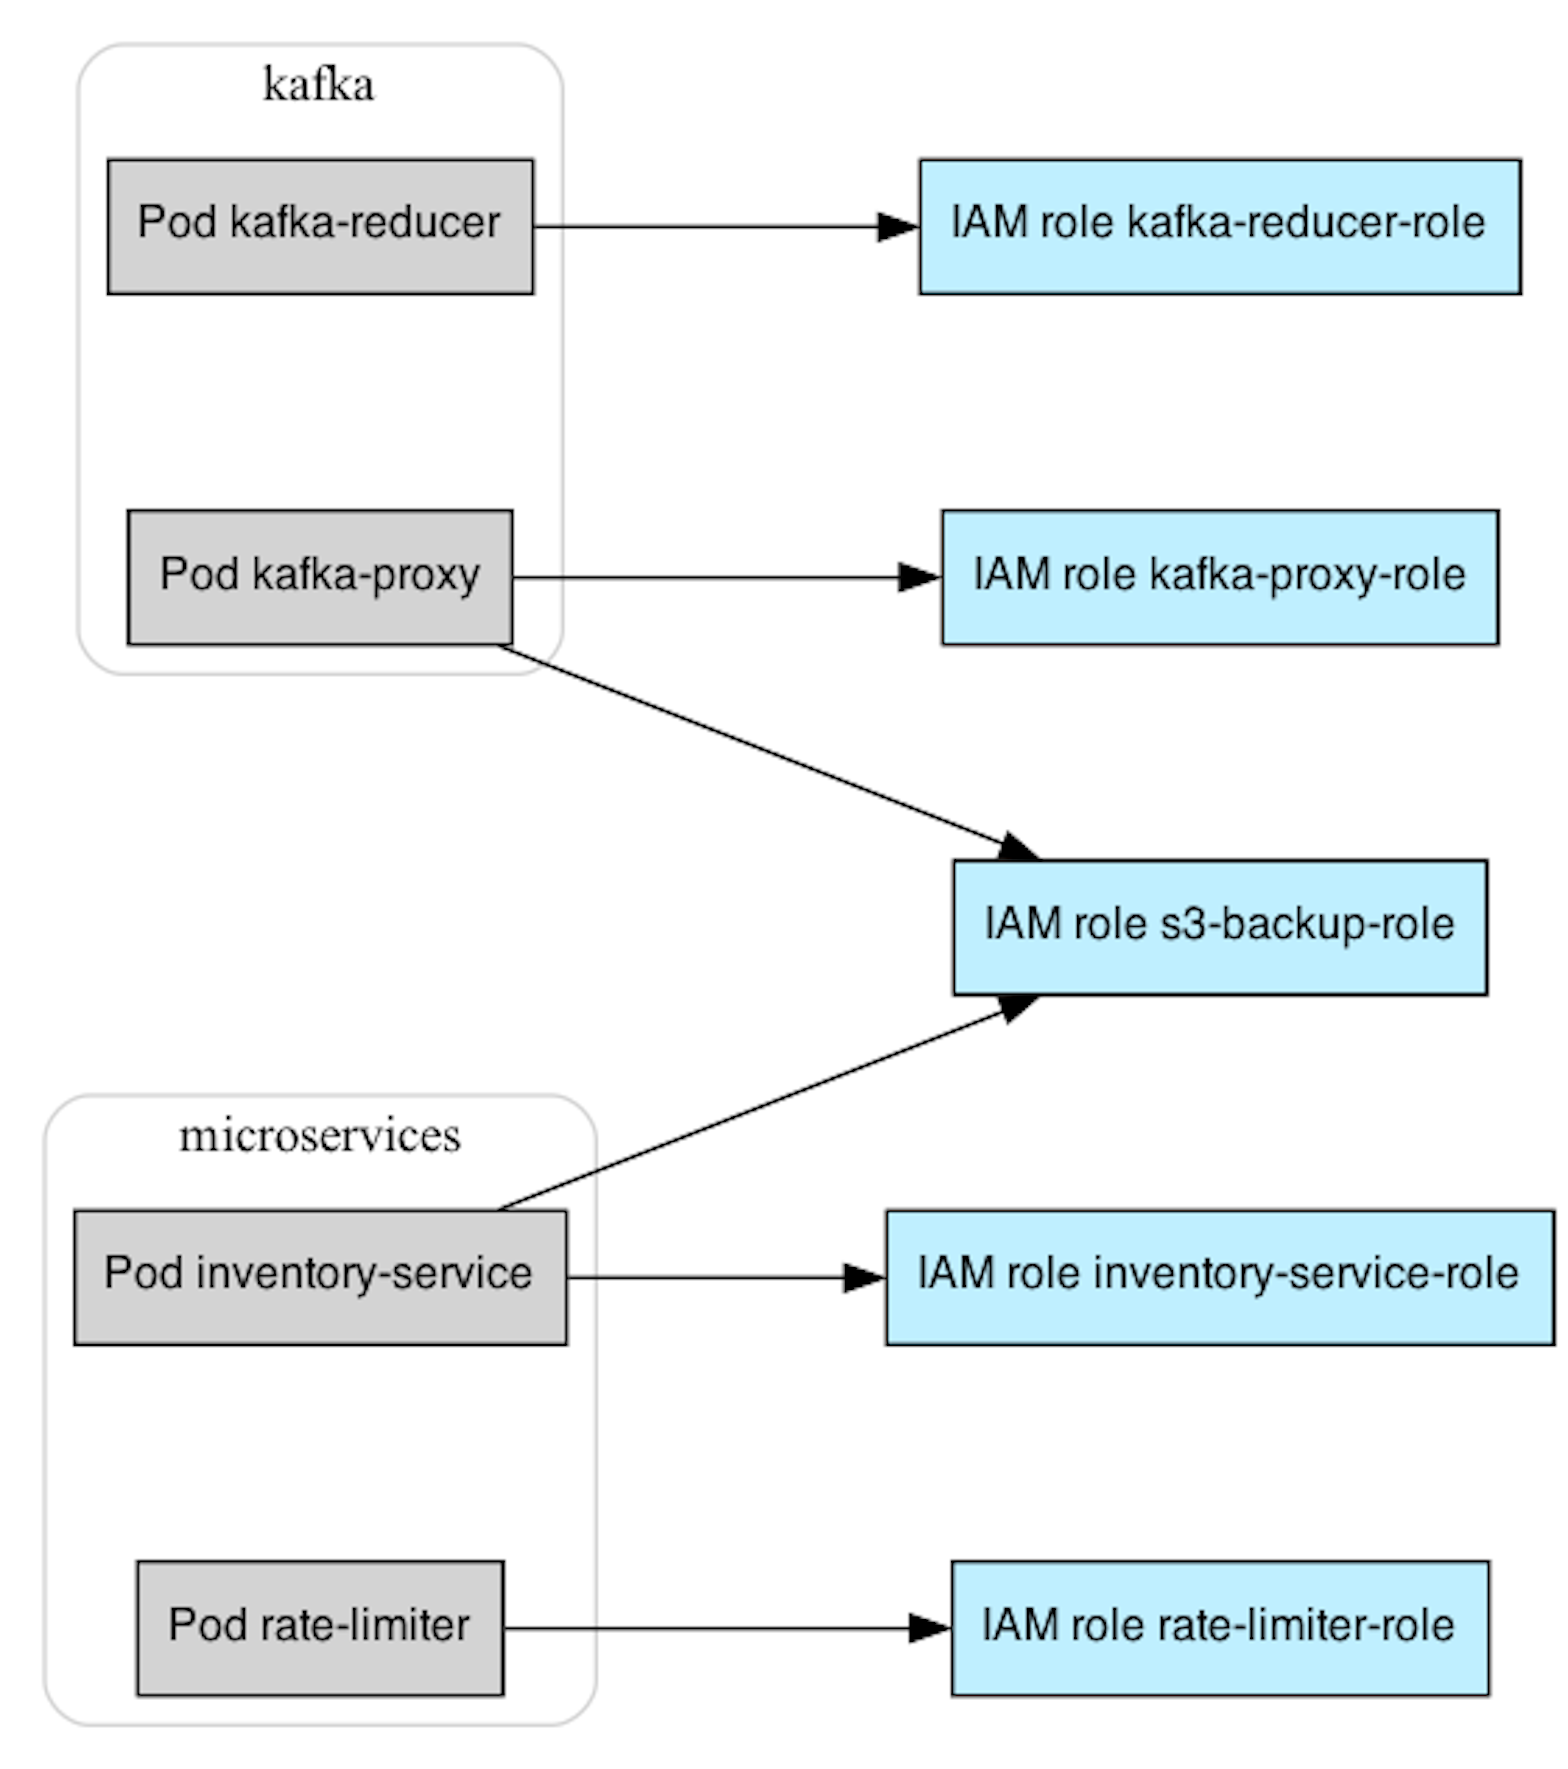 MKAT is able to graph Kubernetes workloads that can assume IAM roles in your AWS account.